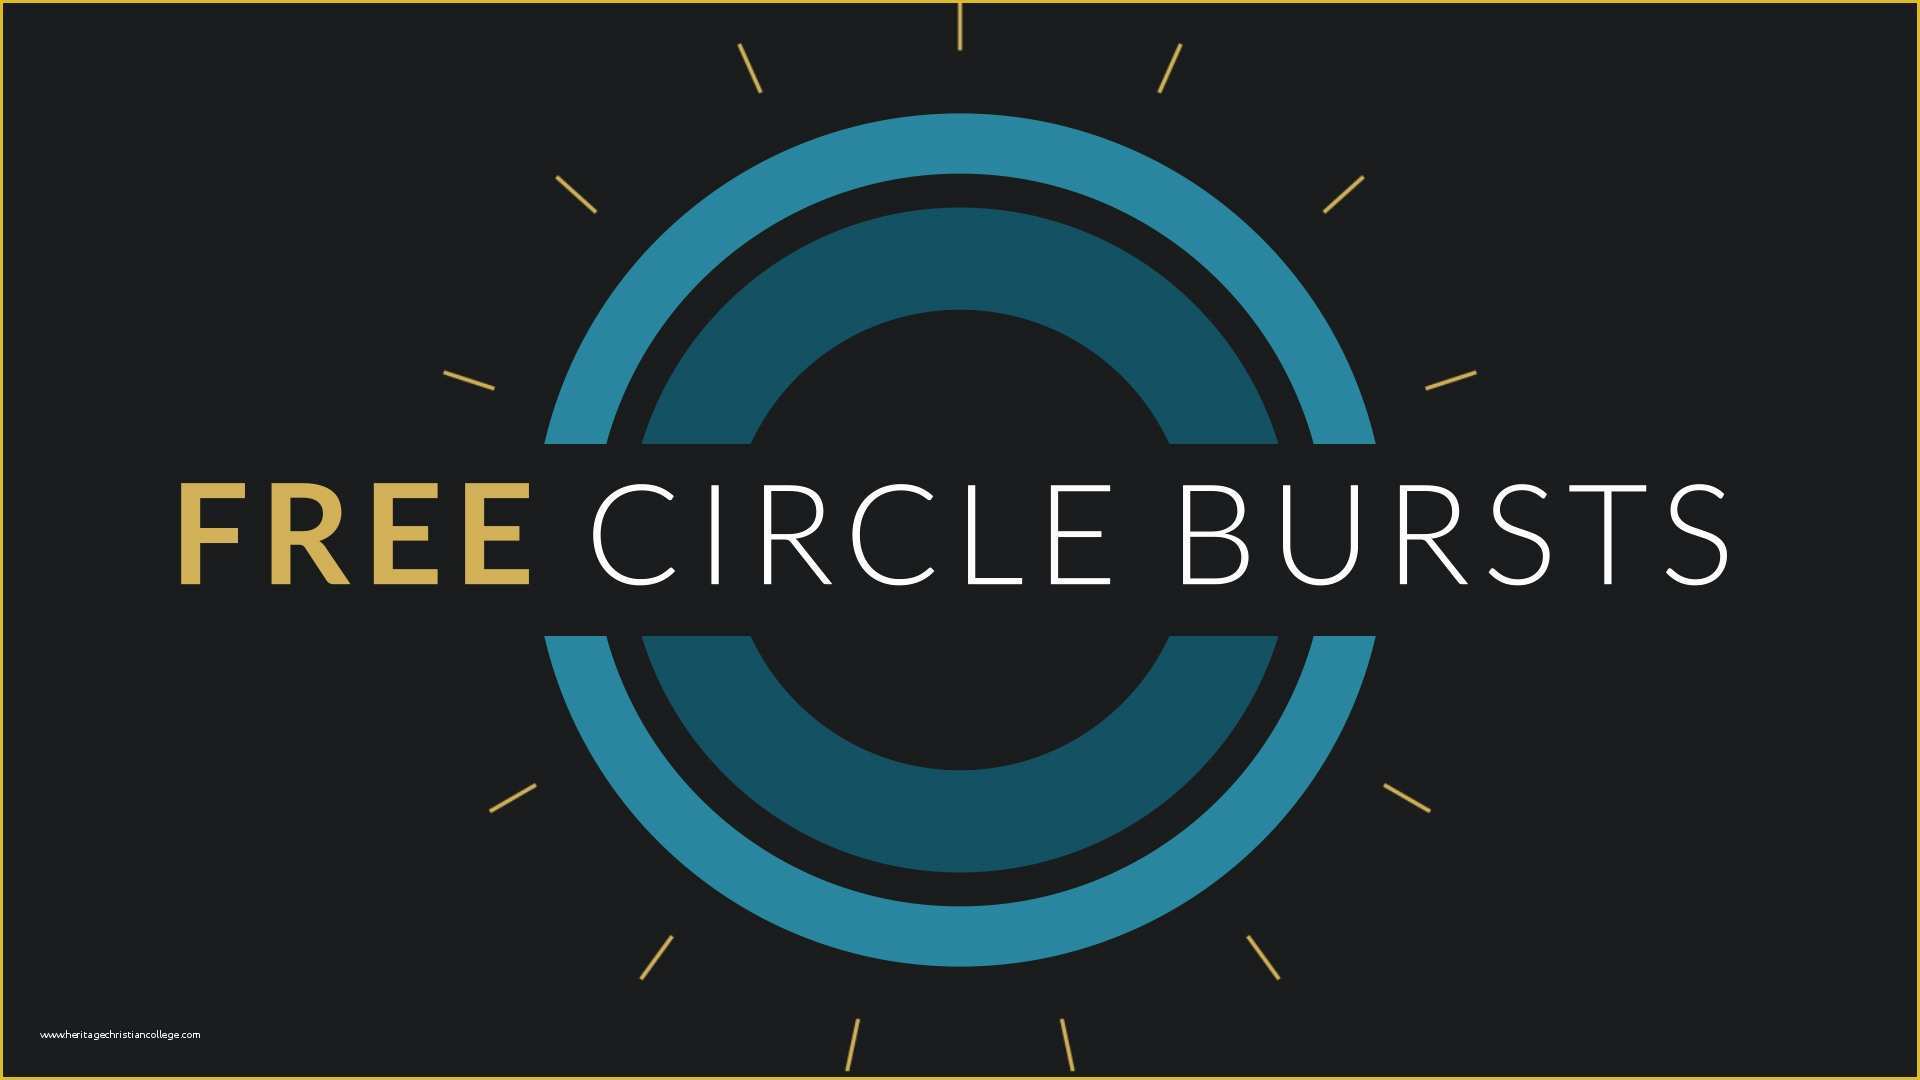 After Effects Project Files and Templates Free Download Of Free after Effects Template Circle Burst assets